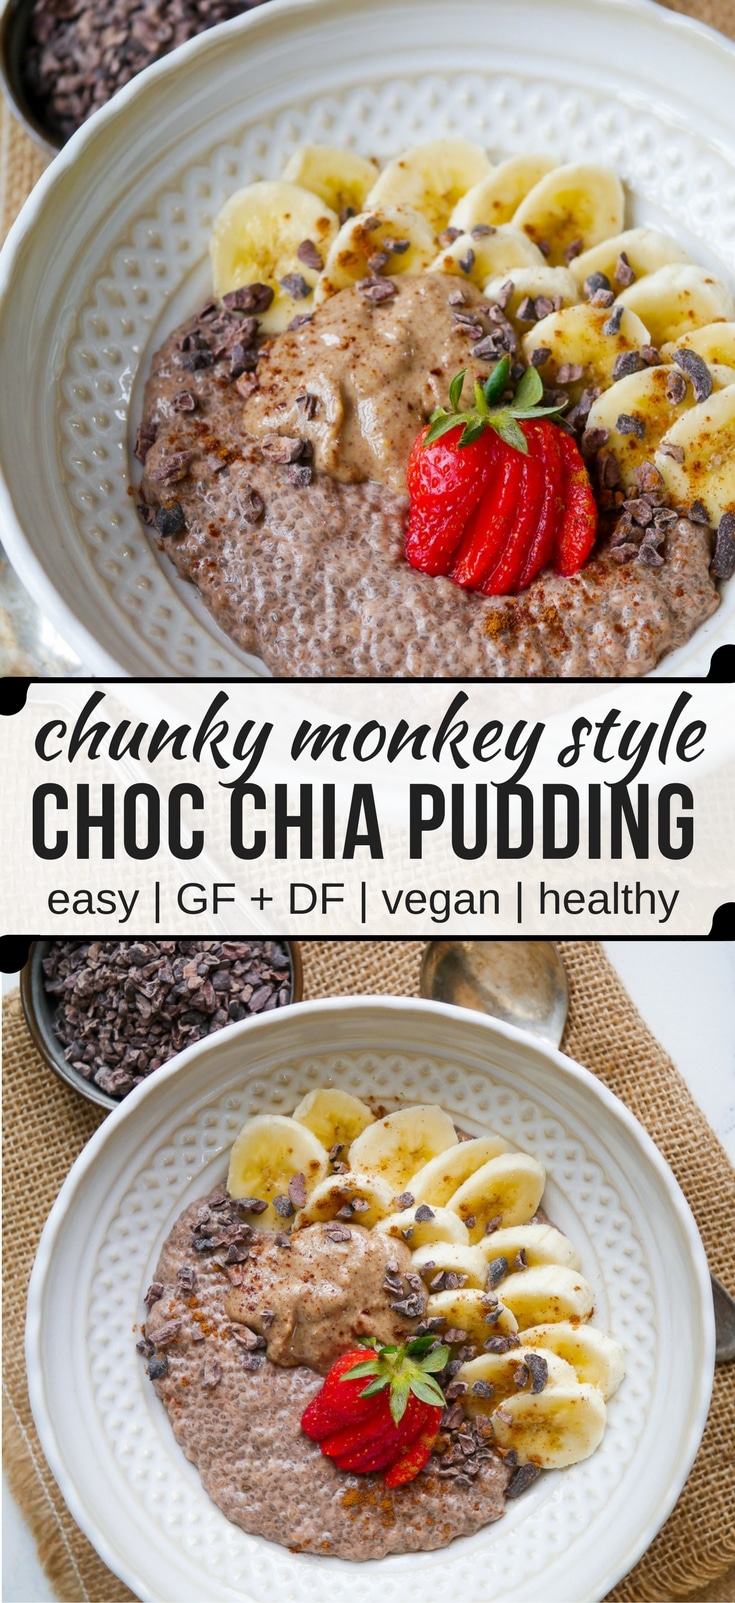 Healthy chunky monkey chia pudding for an easy breakfast or snack; maybe even dessert! Cacao, banana, peanut butter and crunchy cacao nibs. Gluten free, dairy free and vegan. #chiapudding #vegan #healthybreakfast